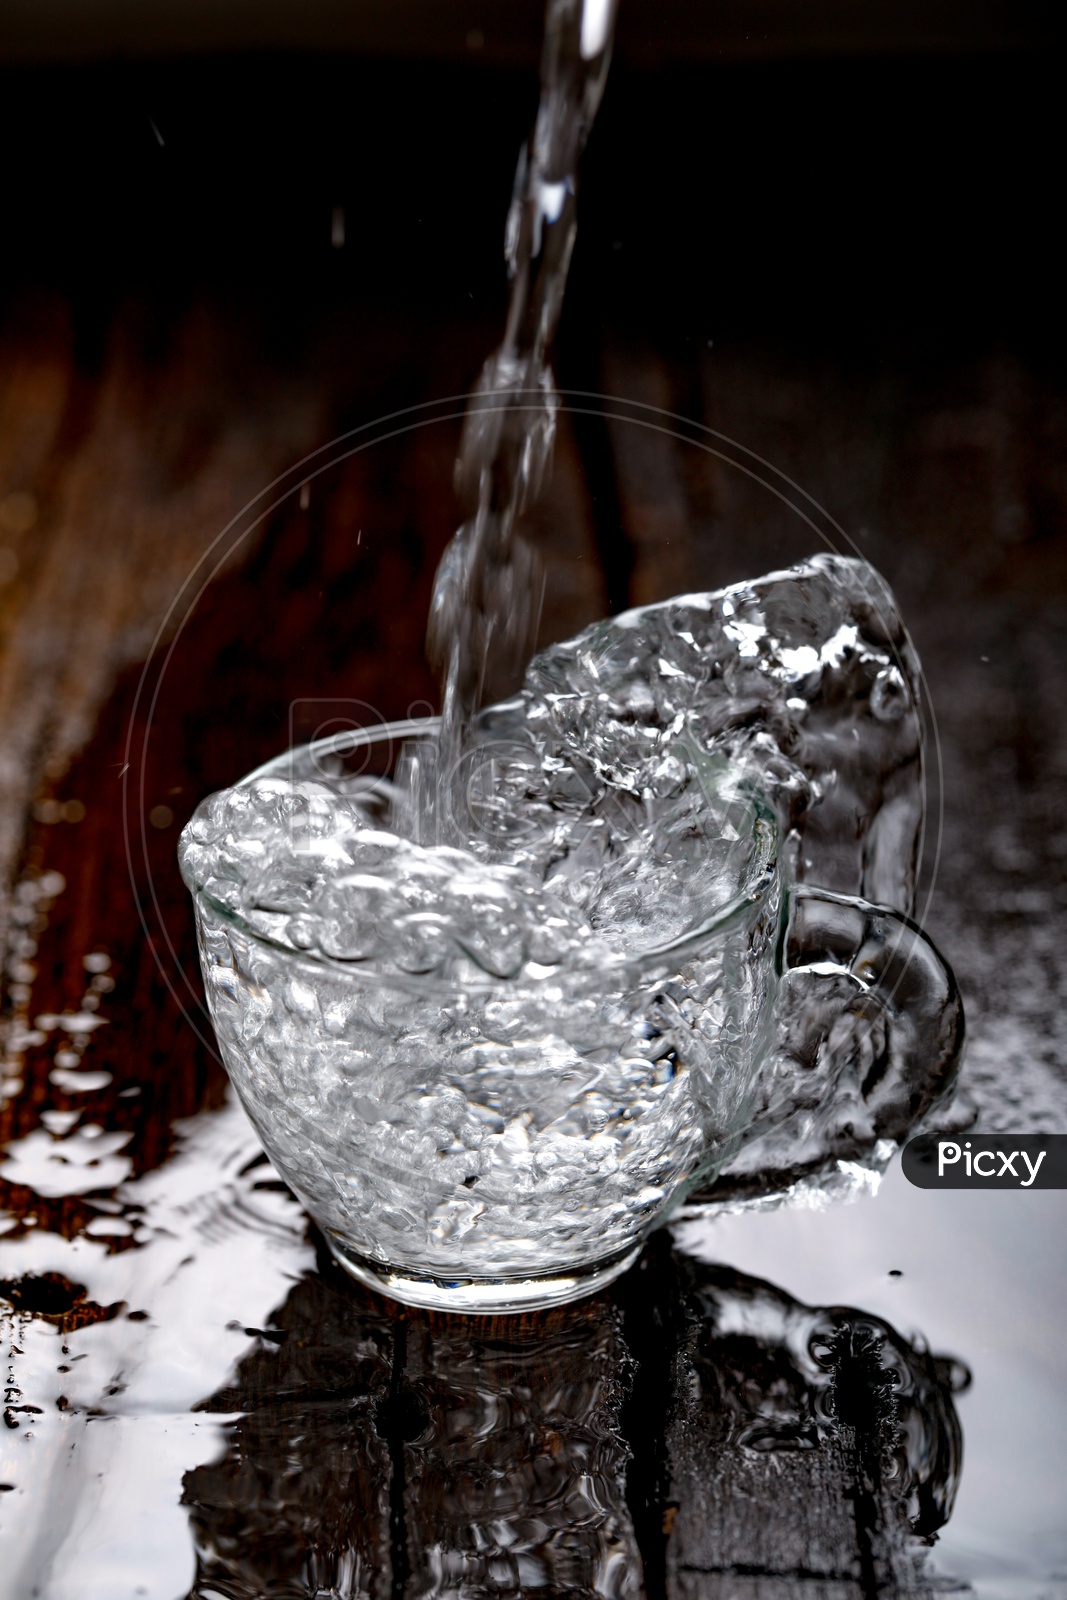 Glass Tea Cup Filling With Water With Water Splash On an Wooden Background